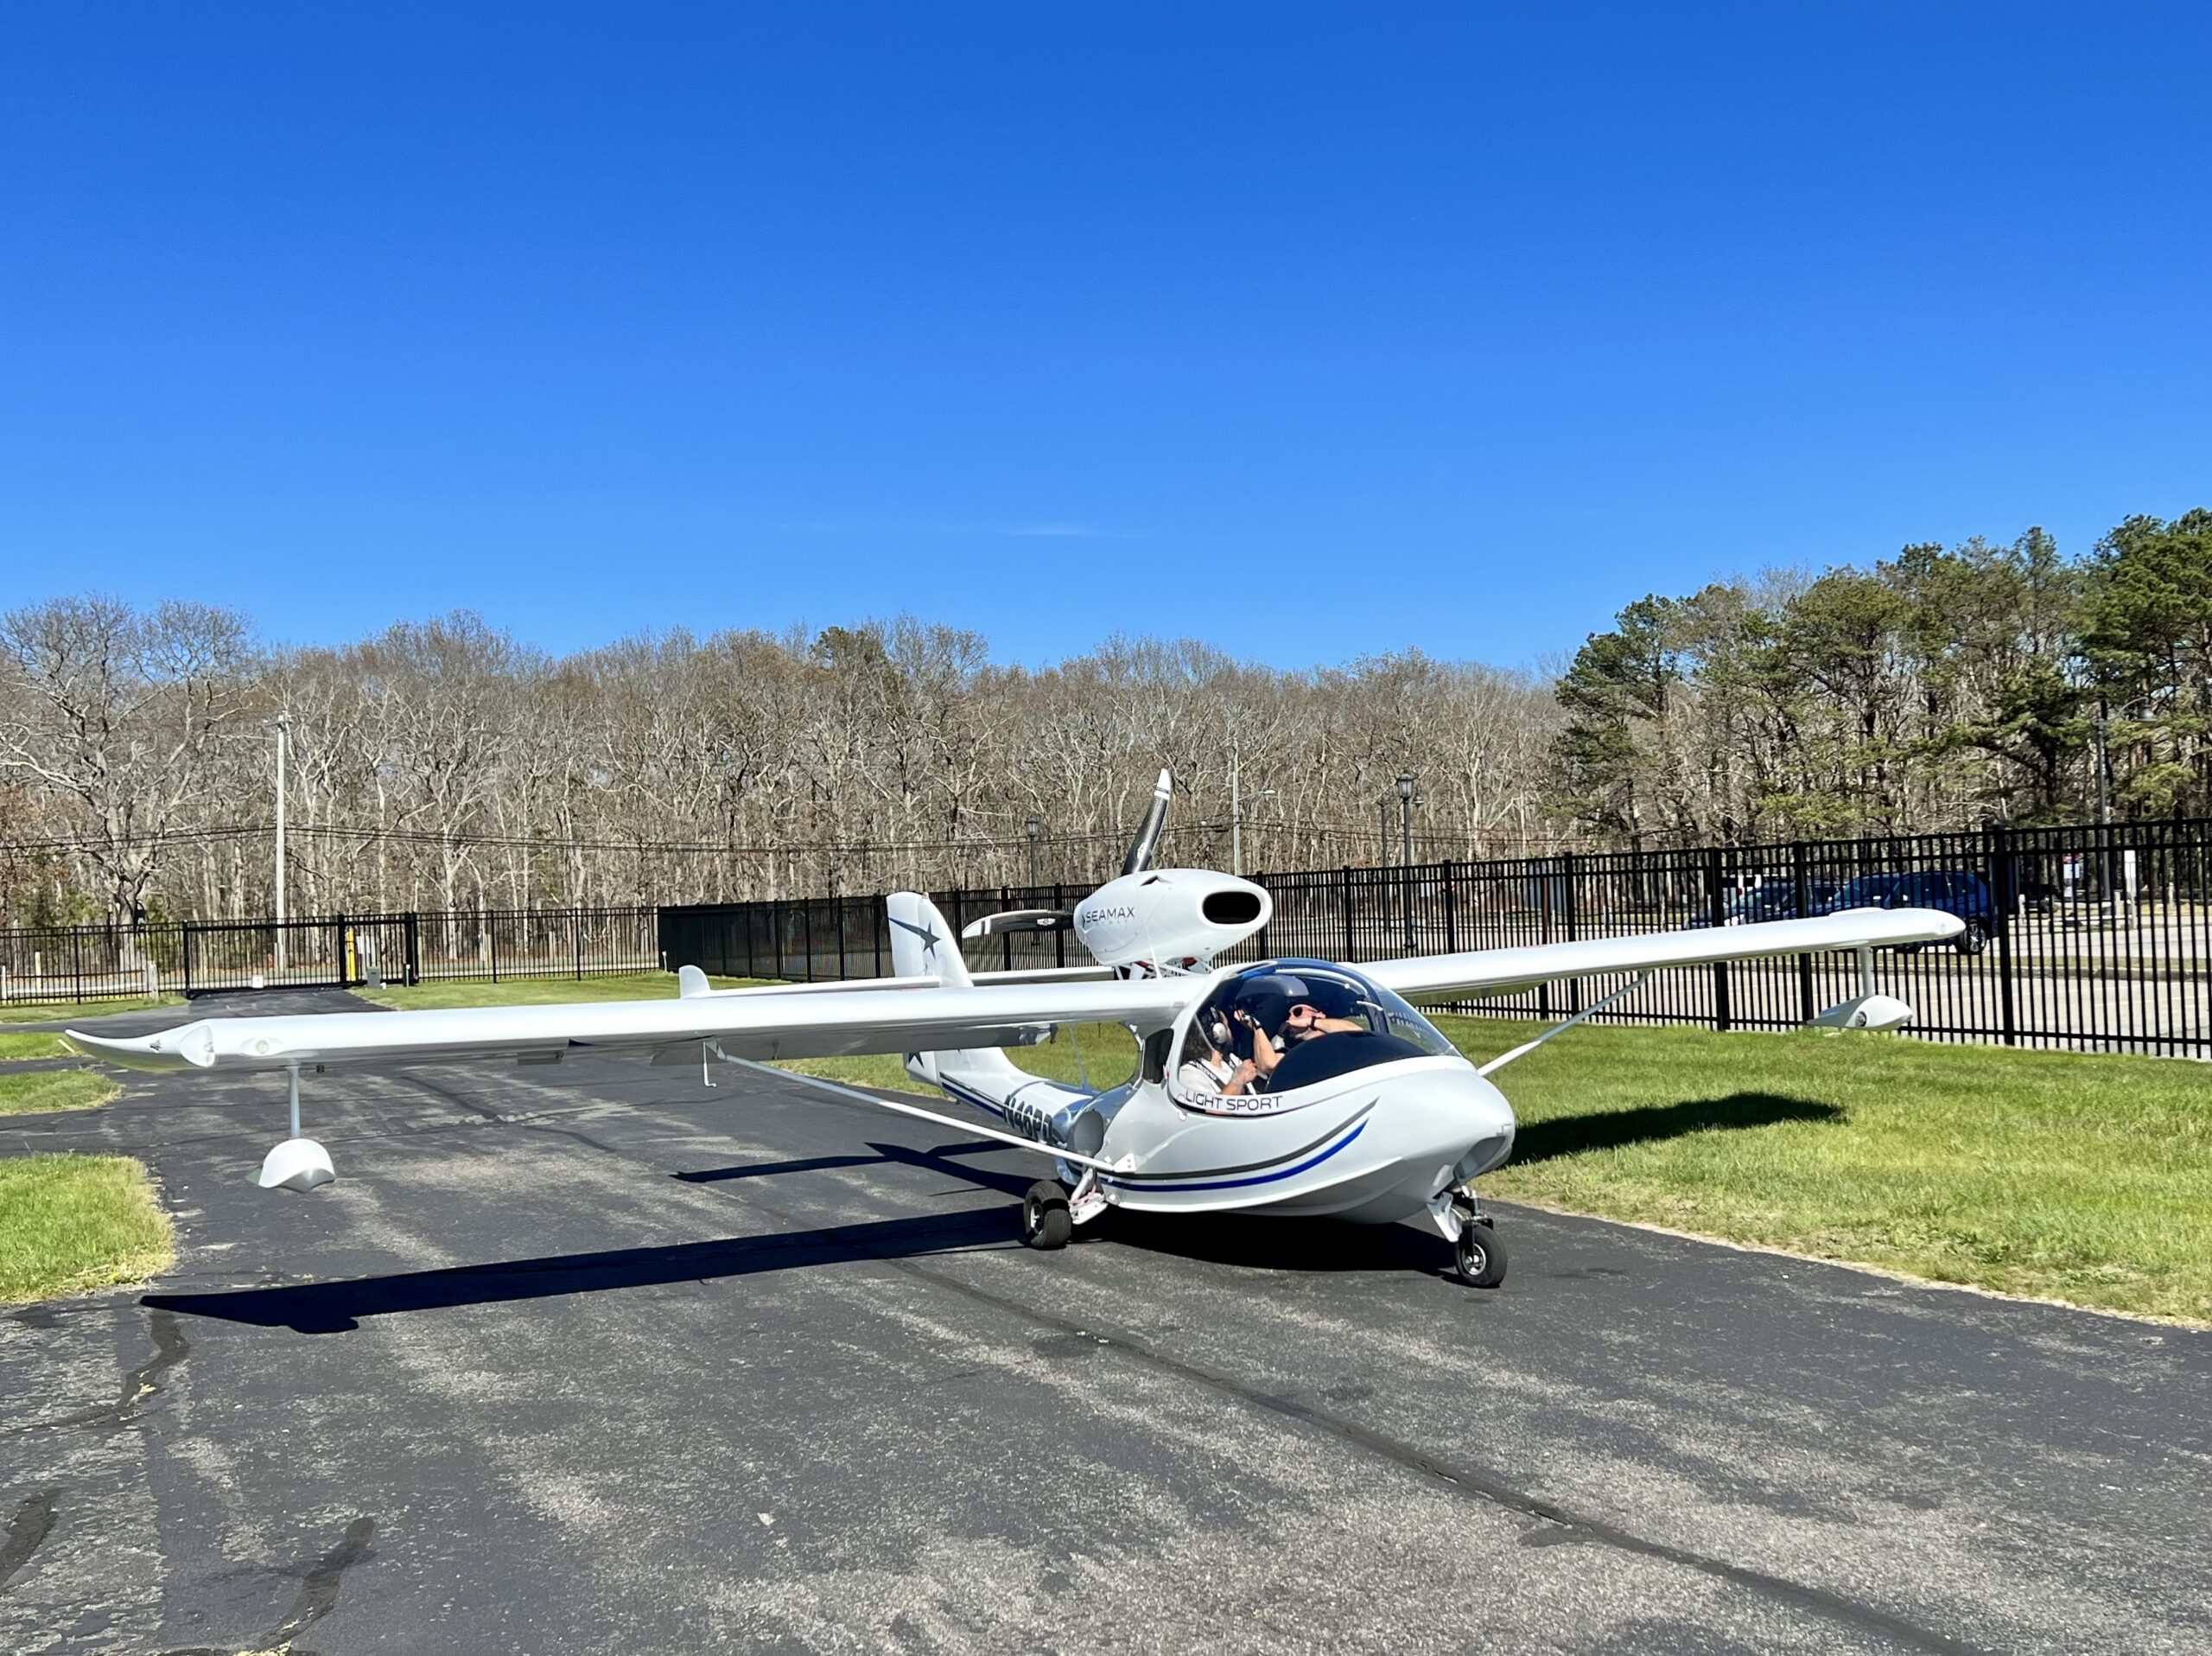 The Seamax M-22 plane that crashed in East Hampton on October 4. The preliminary report on the crash spotlights a bolt where the struts that support the wings attached to the wing.